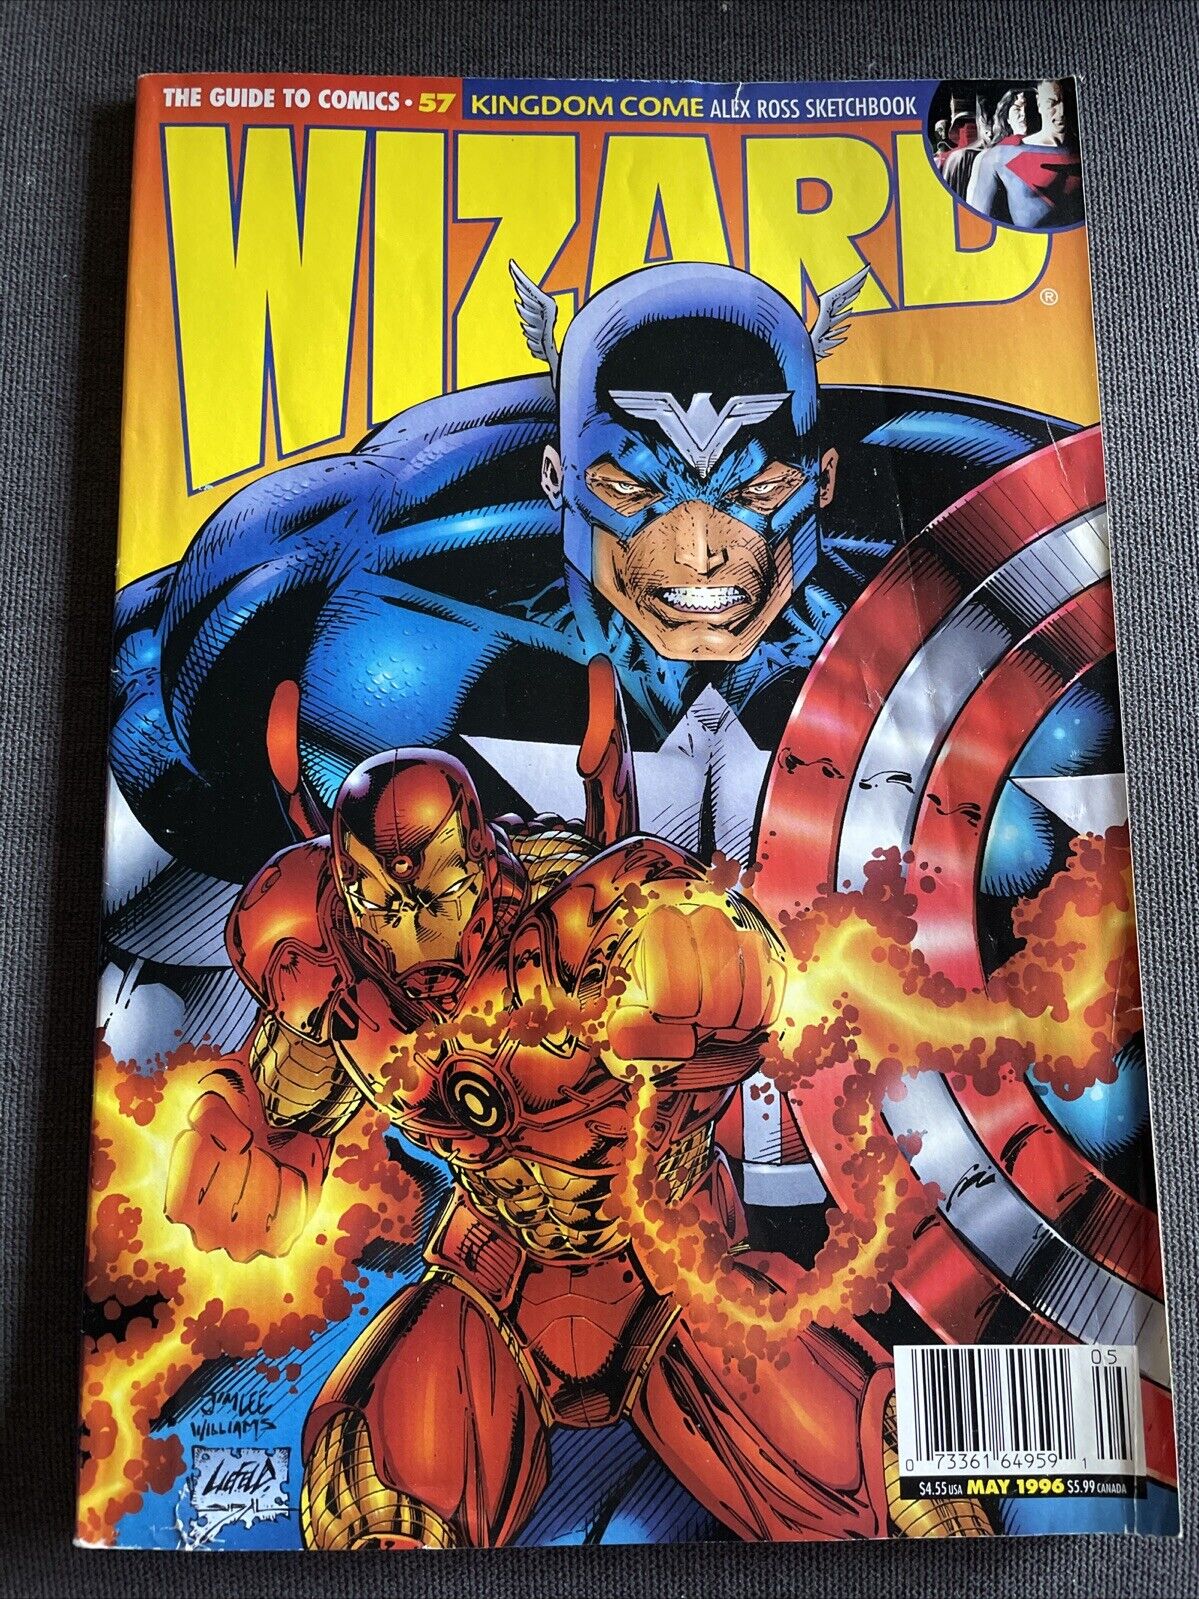 Wizard - The Guide To Comics #57 (Fair Condition)